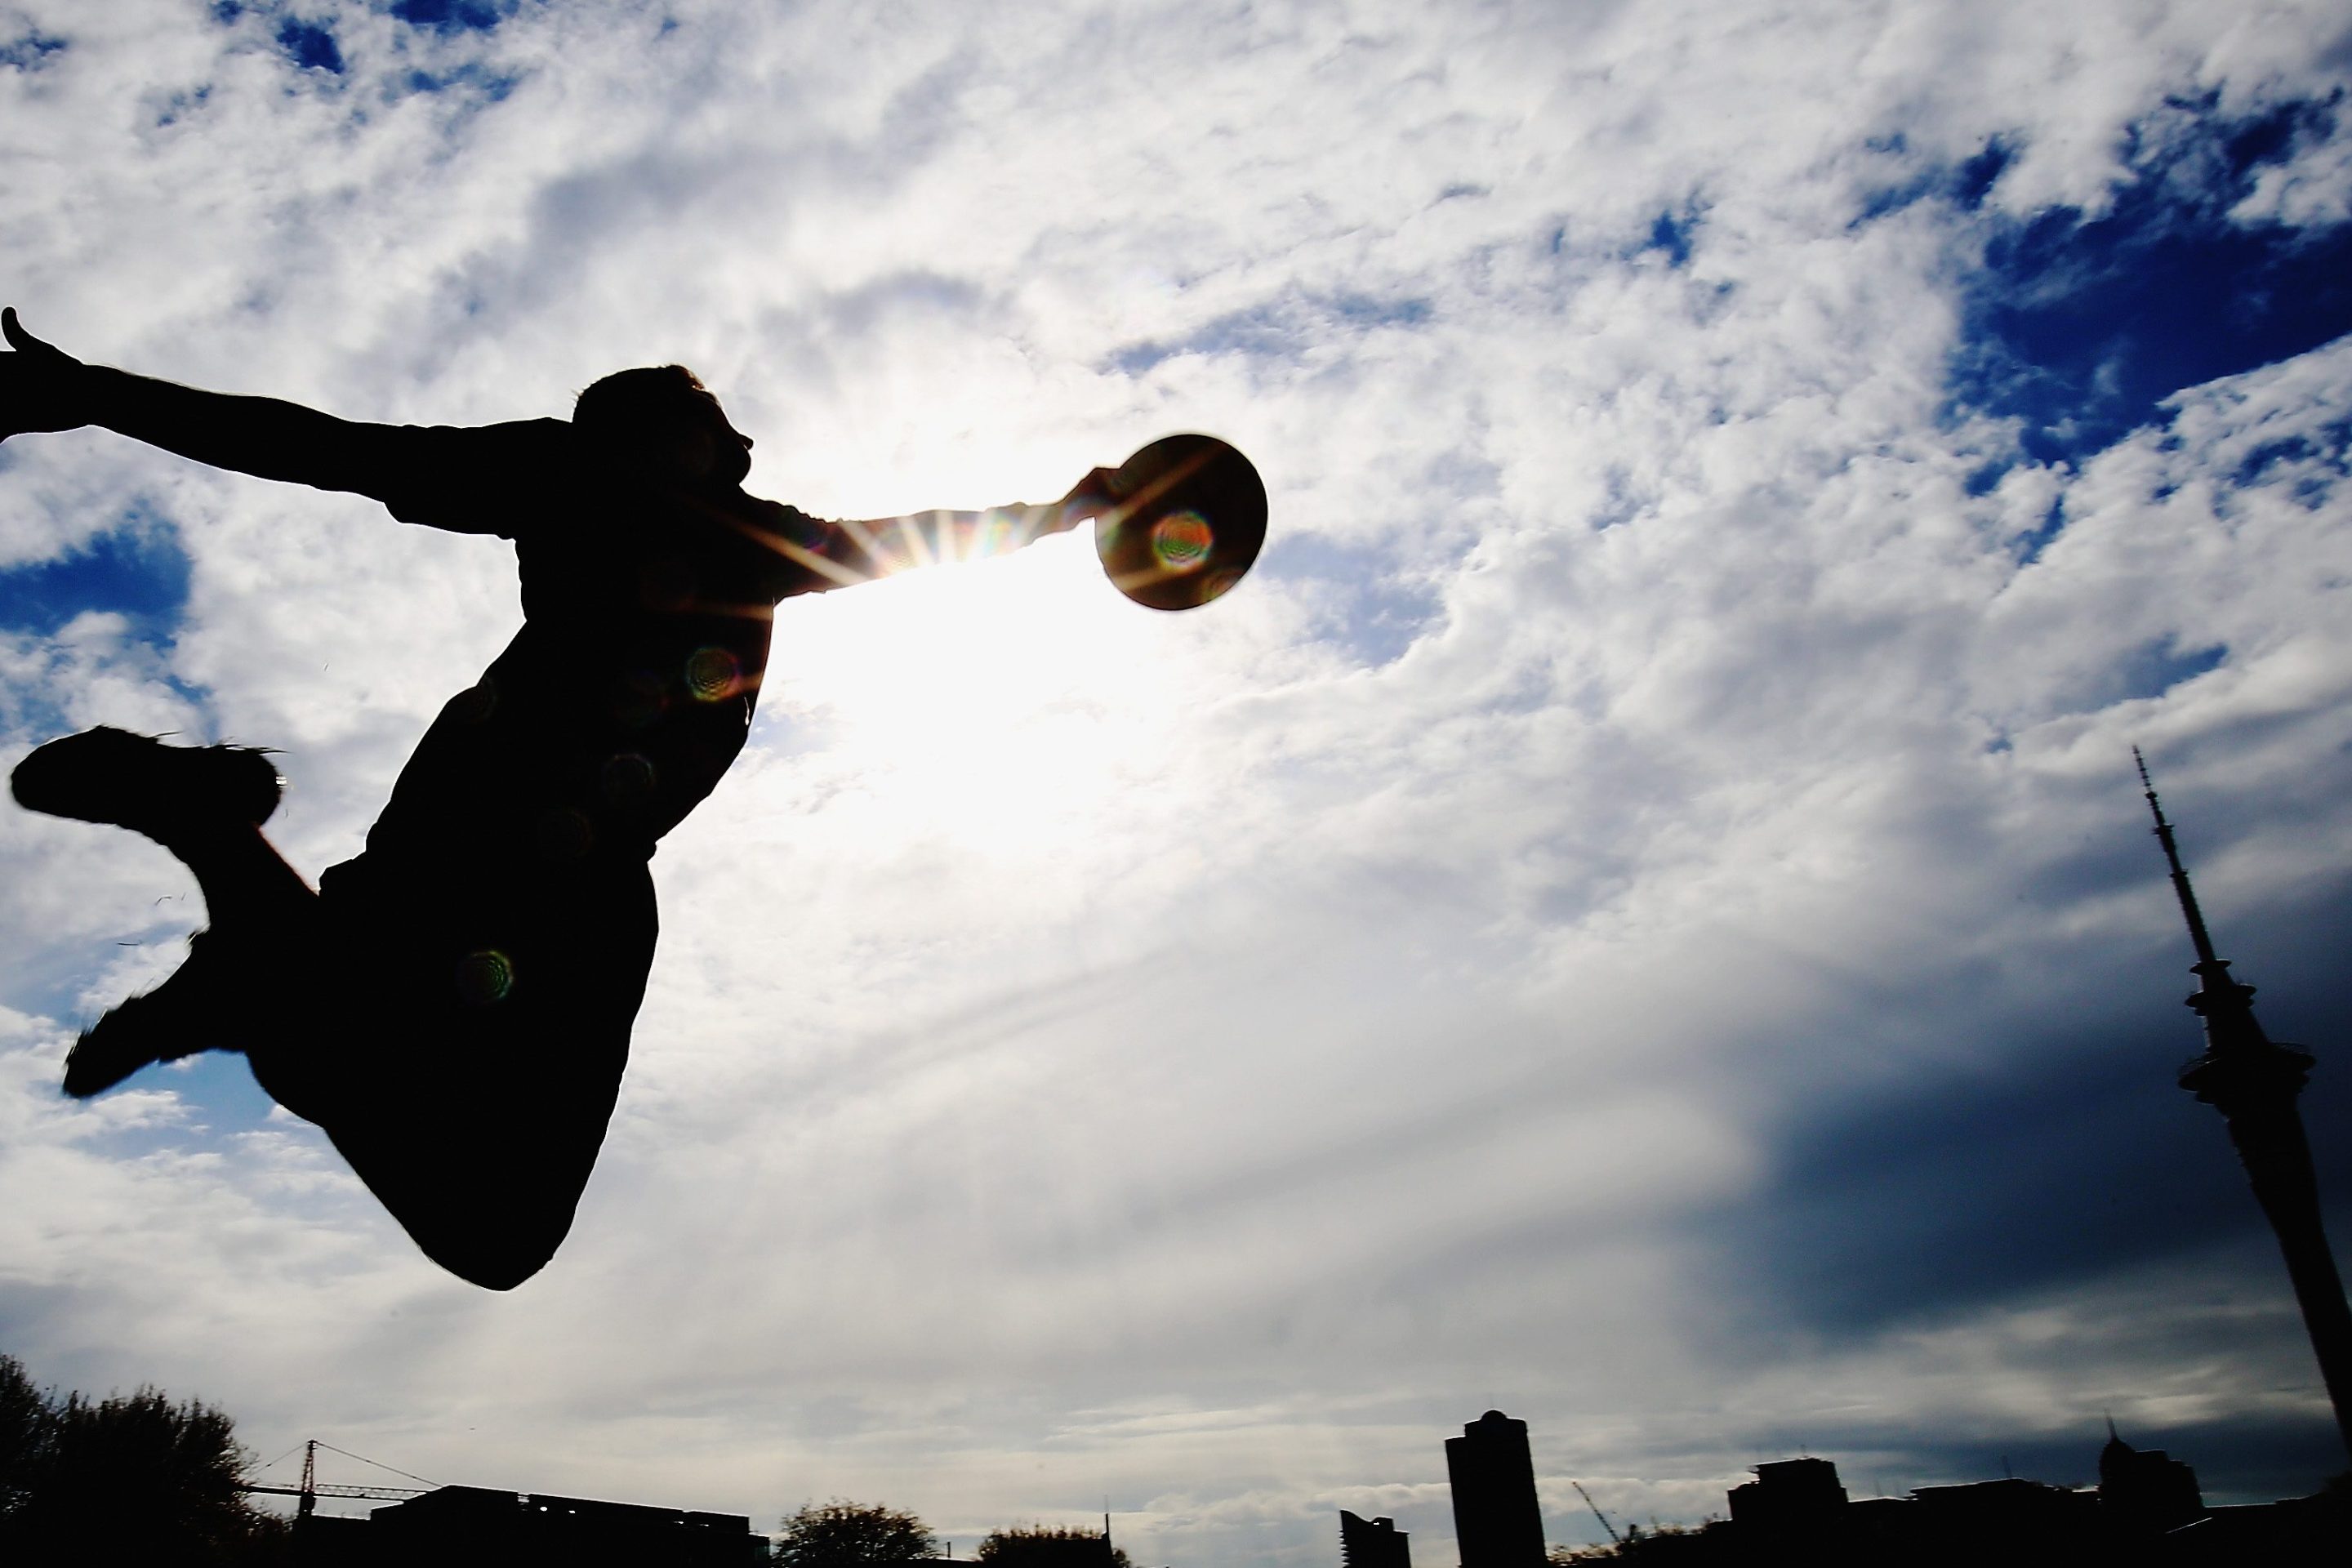 An ultimate frisbee player leaps to make a catch, silhouetted against the sun